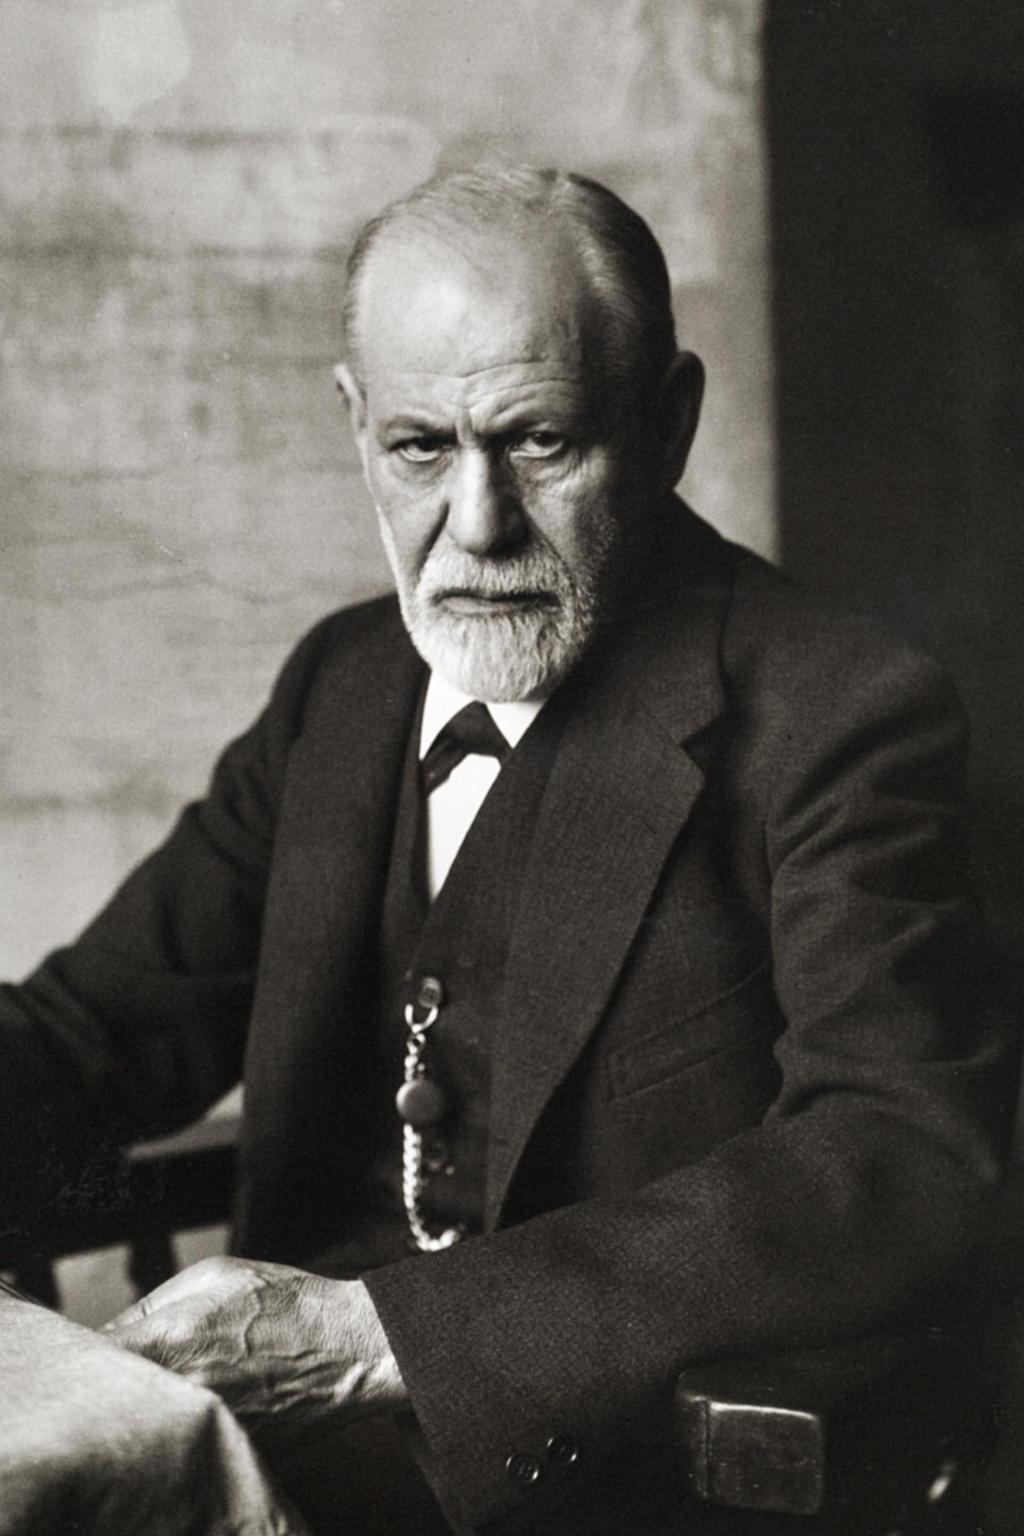 Sigmund Freud Austrian neurologist and the father of psychoanalysis looked at sexuality - Oedipus complex (child s unconscious desire to have sex with a parent) analysis of dreams and unconscious